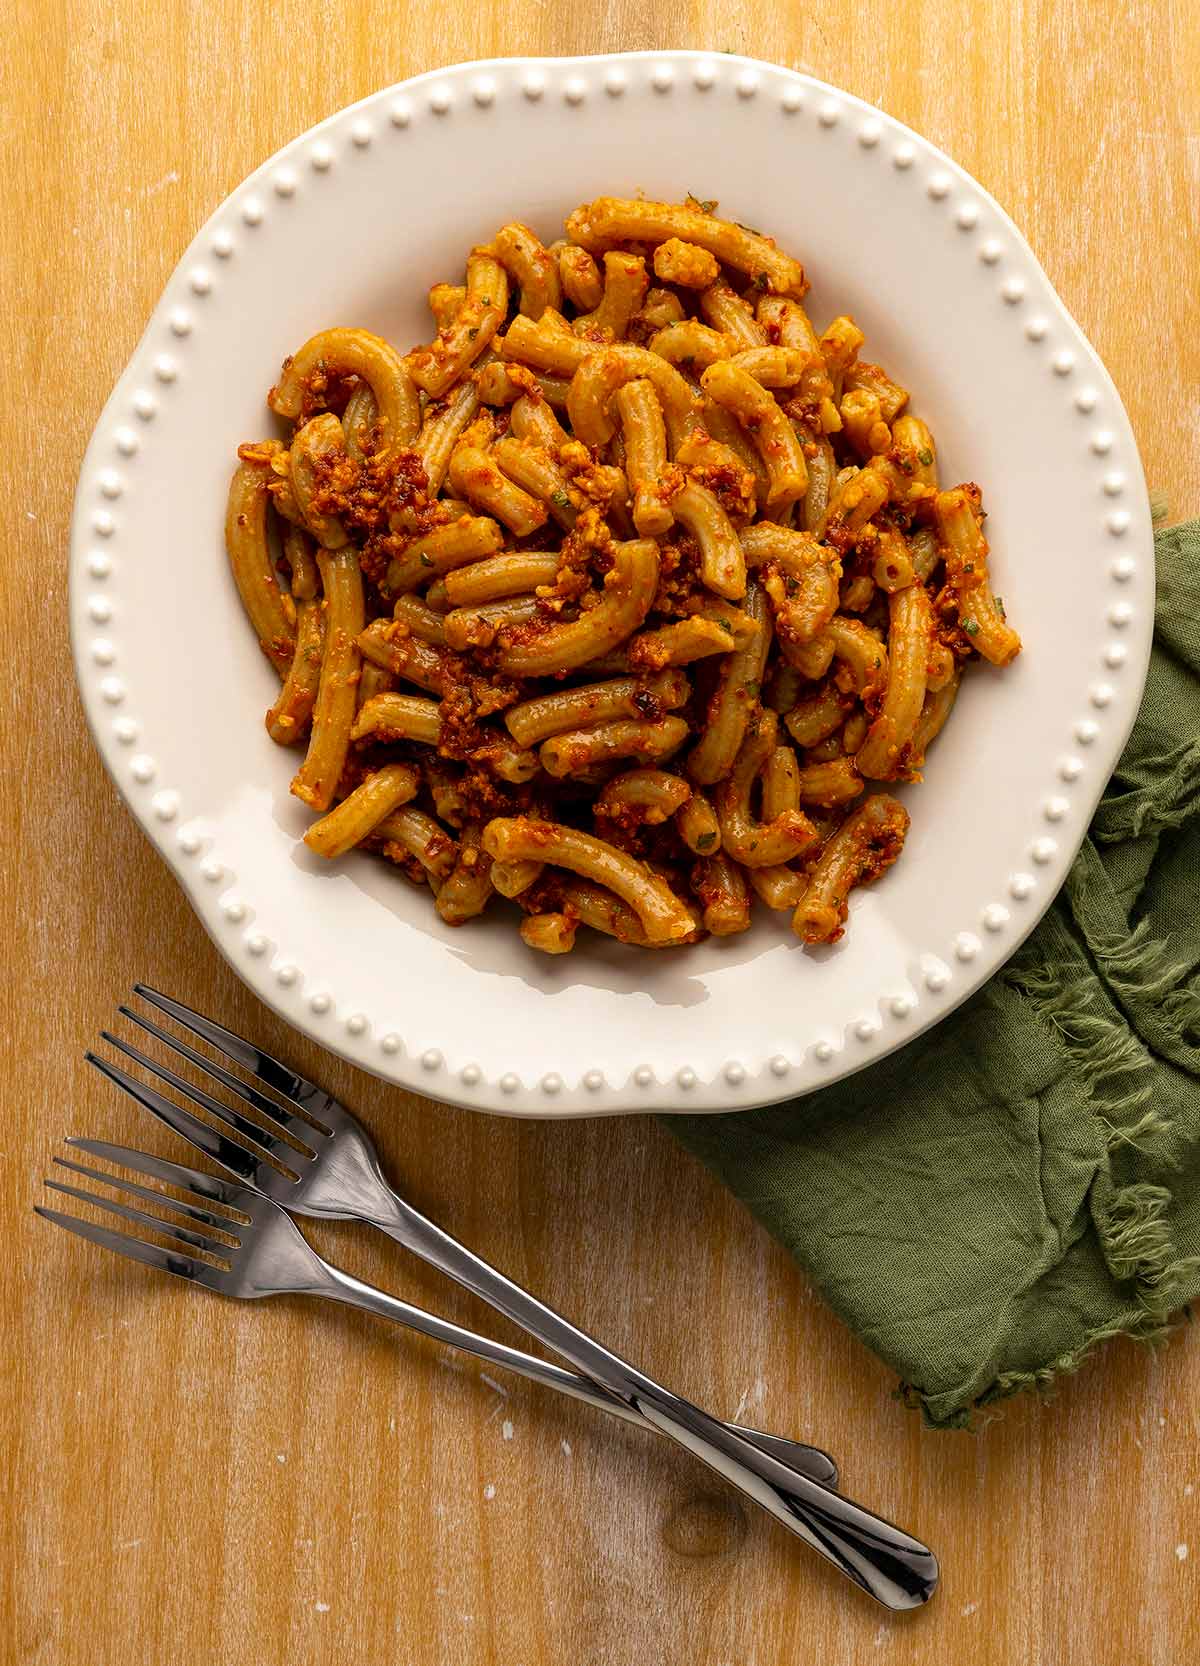 A bowl of pasta dressed with red pesto